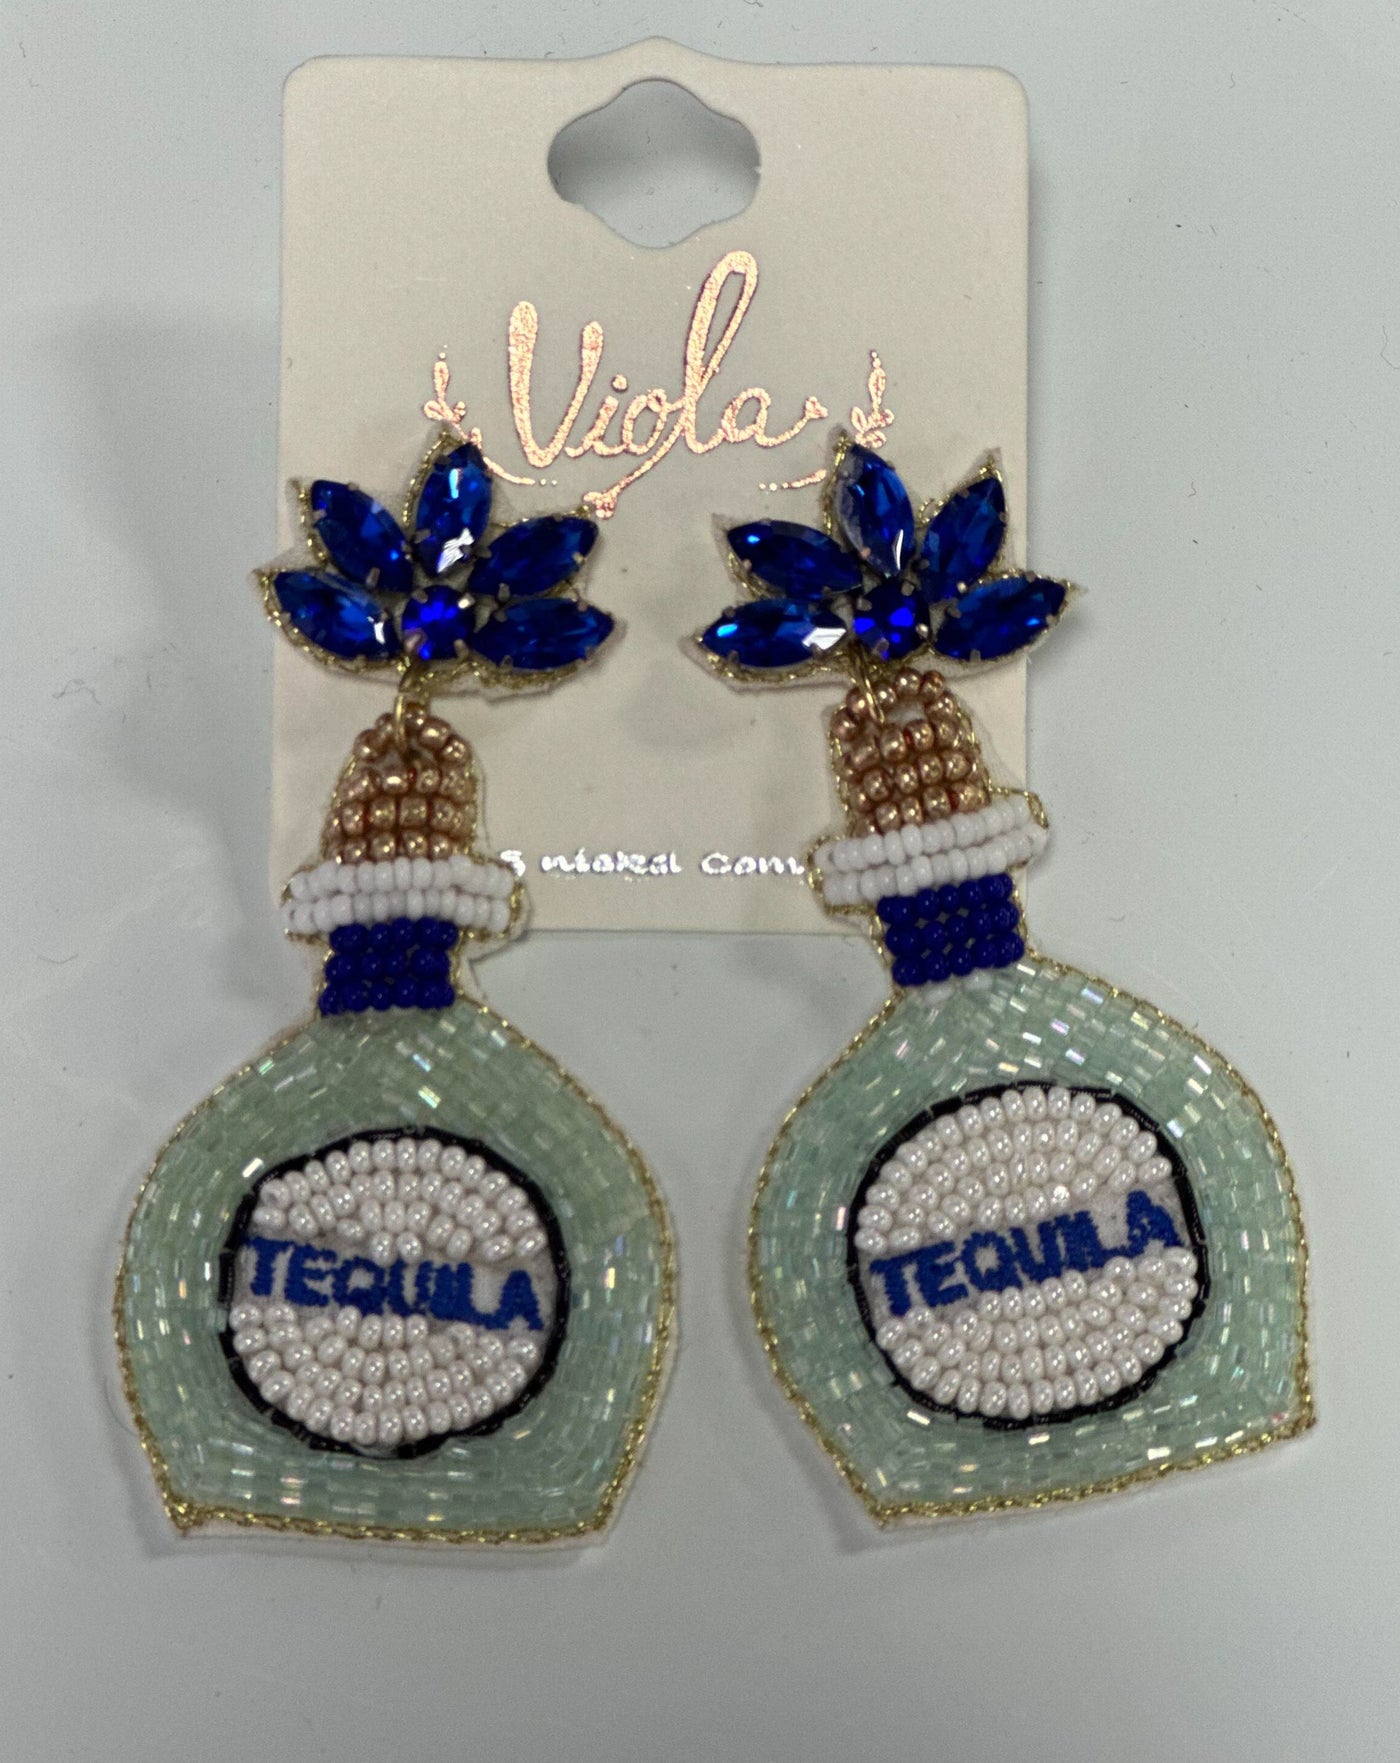 Tequila Makes Me Crazy Earrings